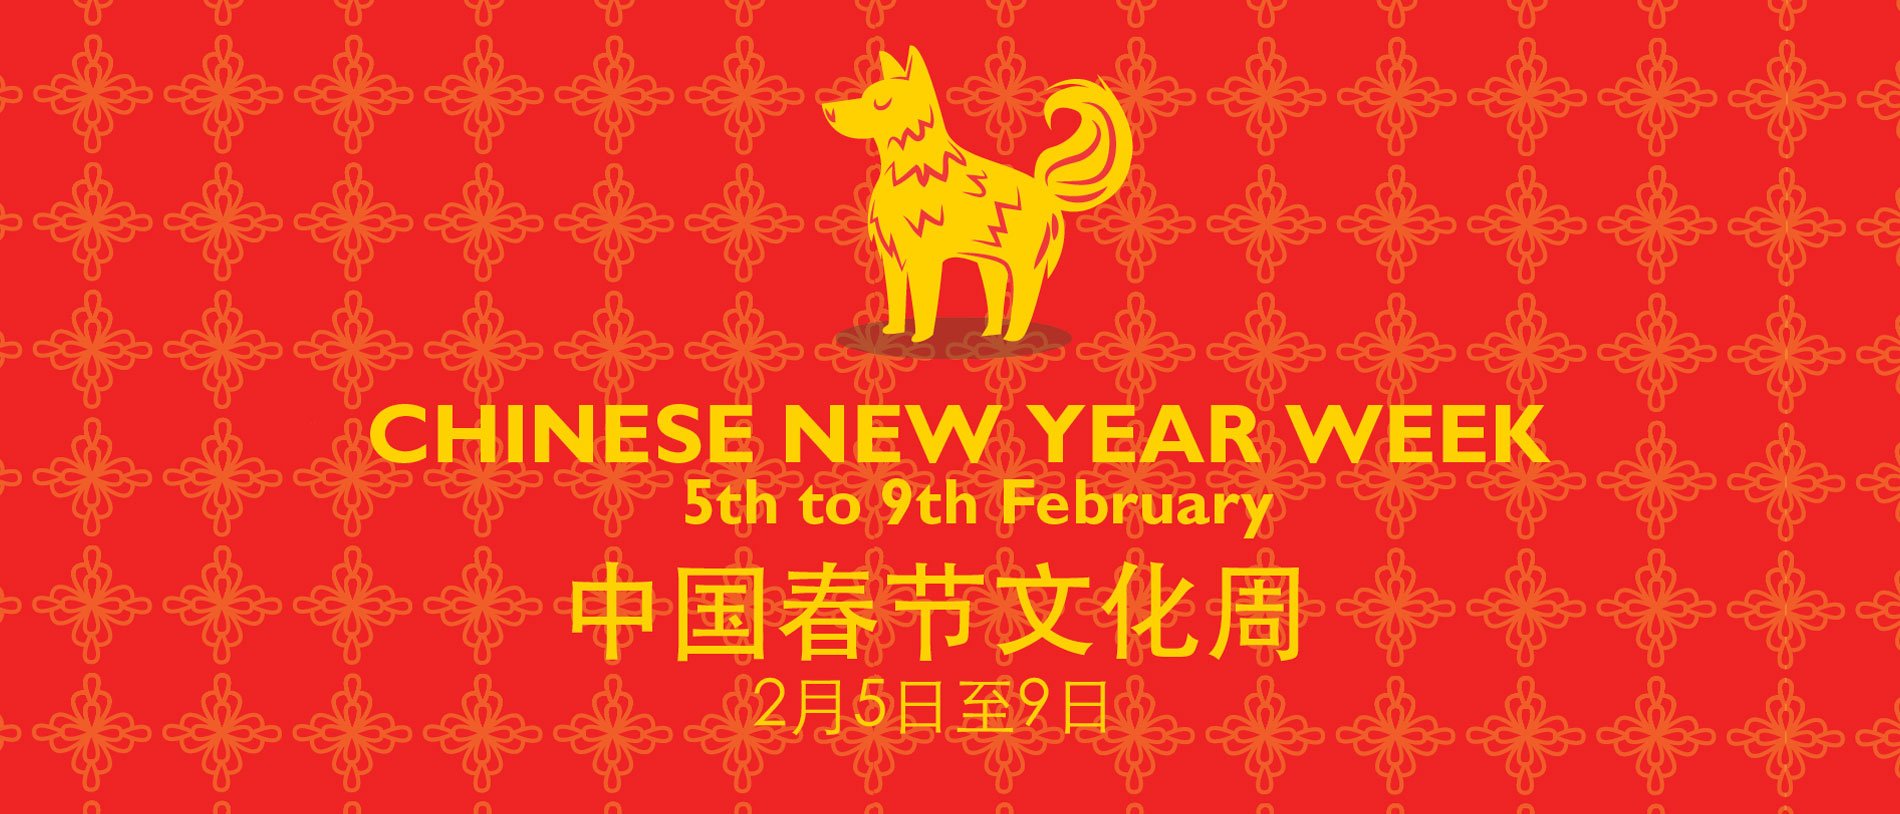 Chinese New Year Week